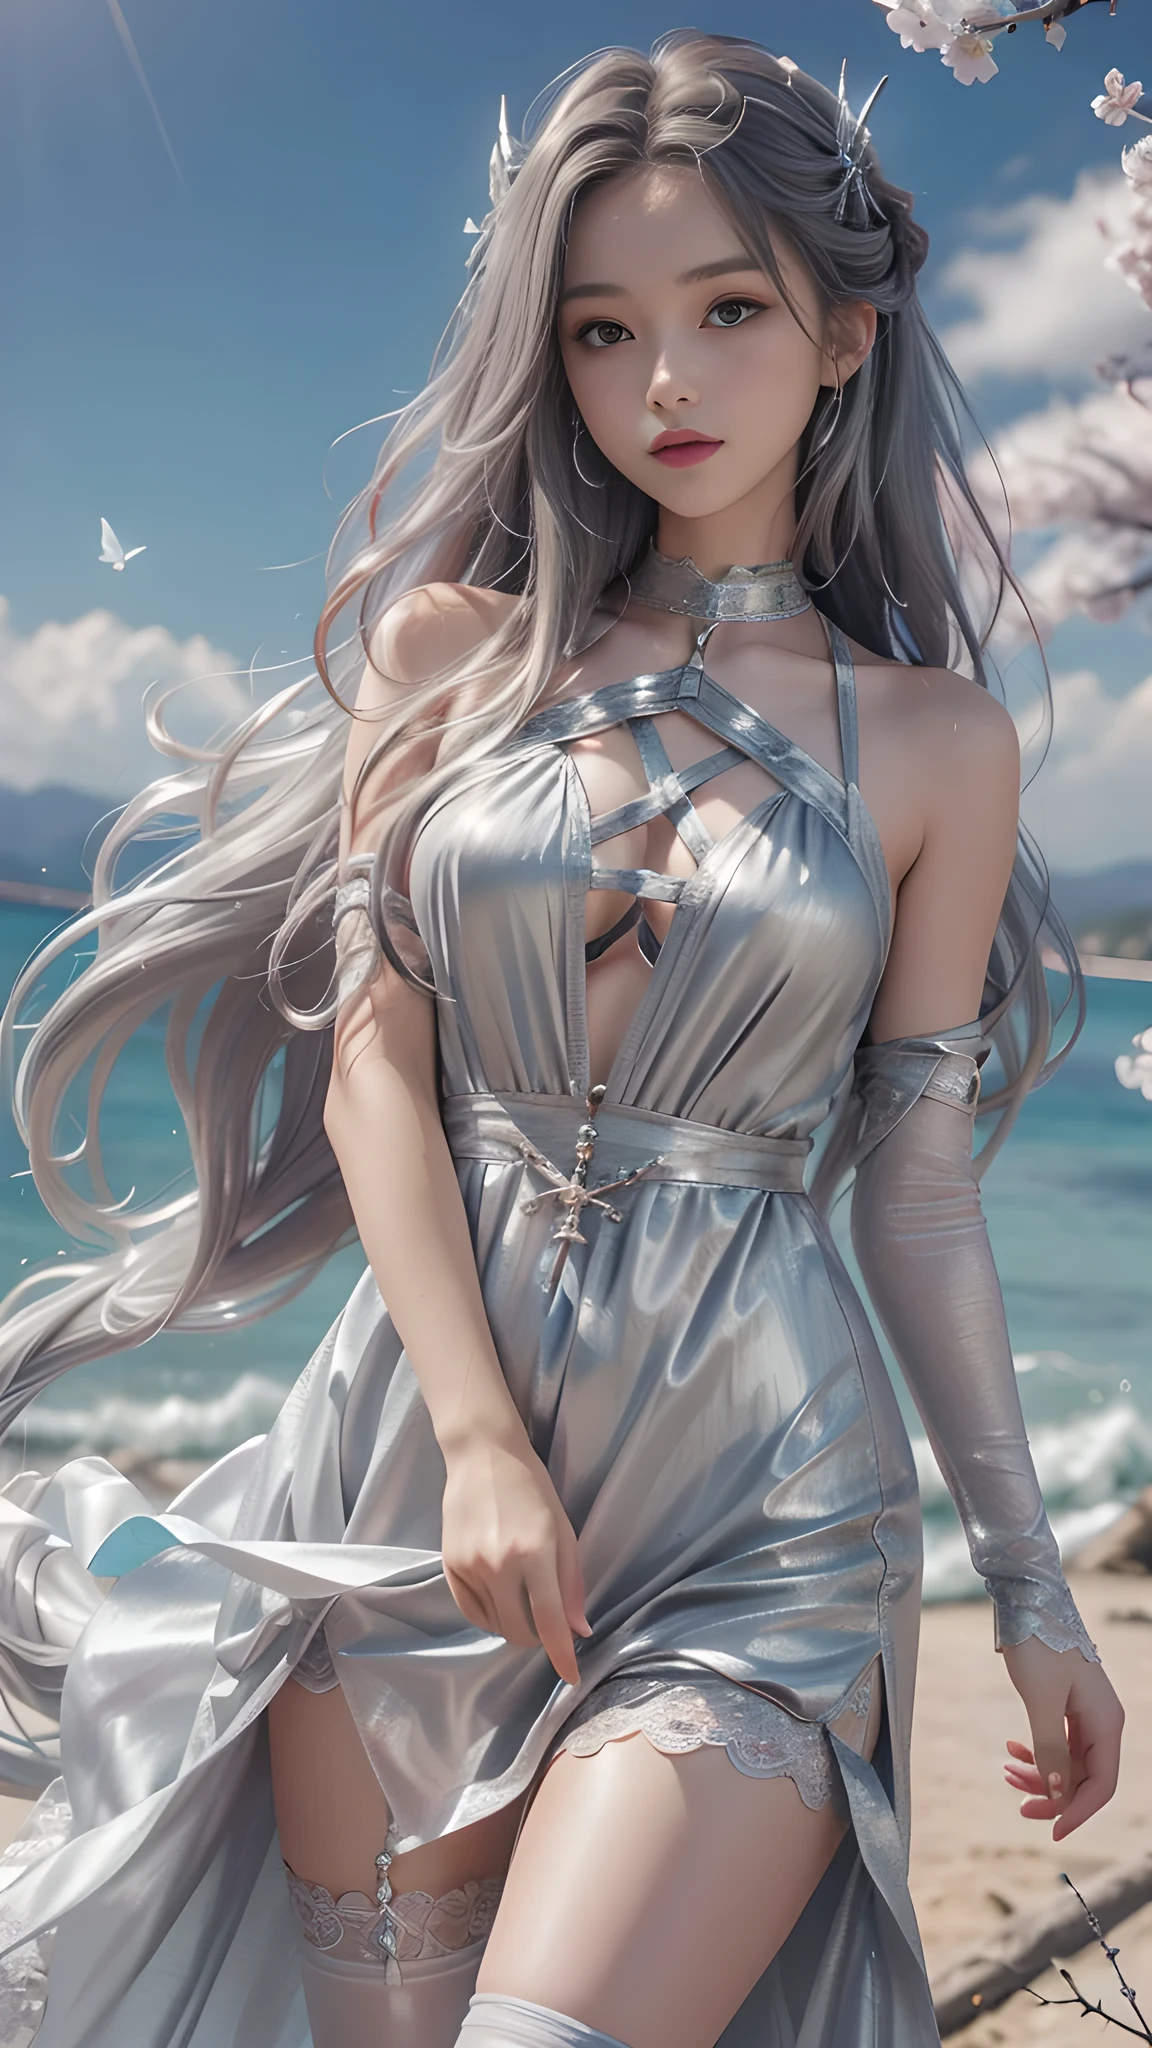 8K, ultra hd, masterpiece, hd color, 1 girl, perfect face, very long curly hair, detailed eyes, she wears a small silver dress, ((silver clothes)), stockings, (( criss-cross lace)), sardine, straps, clothing net, ((long loop)), jewelry, seaside, Realistic landscape, majestic landscape, standing in front of the night, evening, Butterfly , cherry blossoms, blowing wind, perfect posture, sexyly poses,